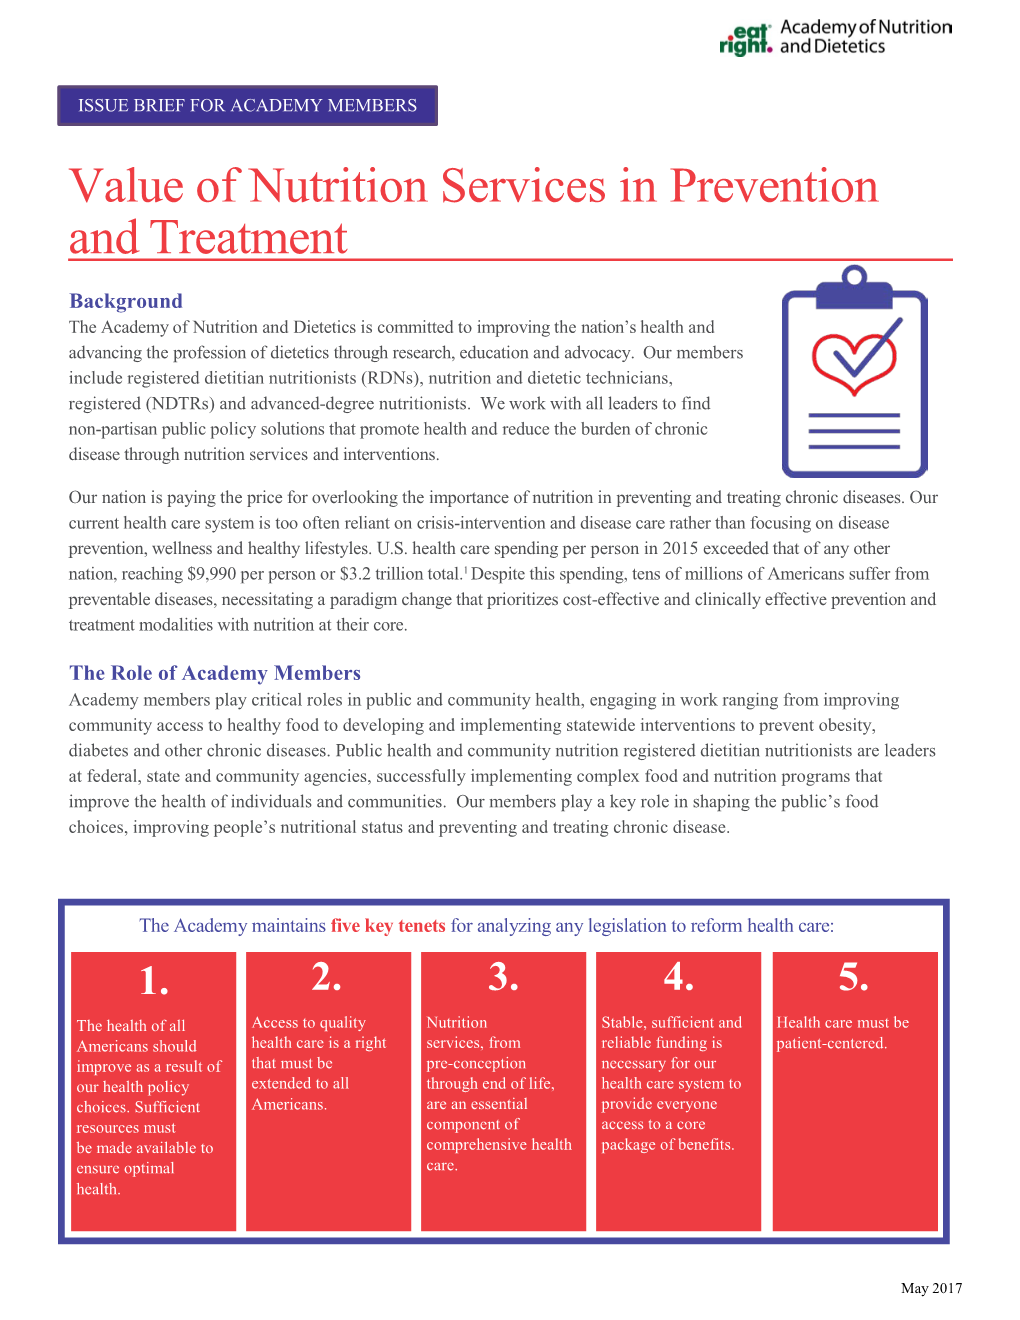 Value of Nutrition Services in Prevention and Treatment